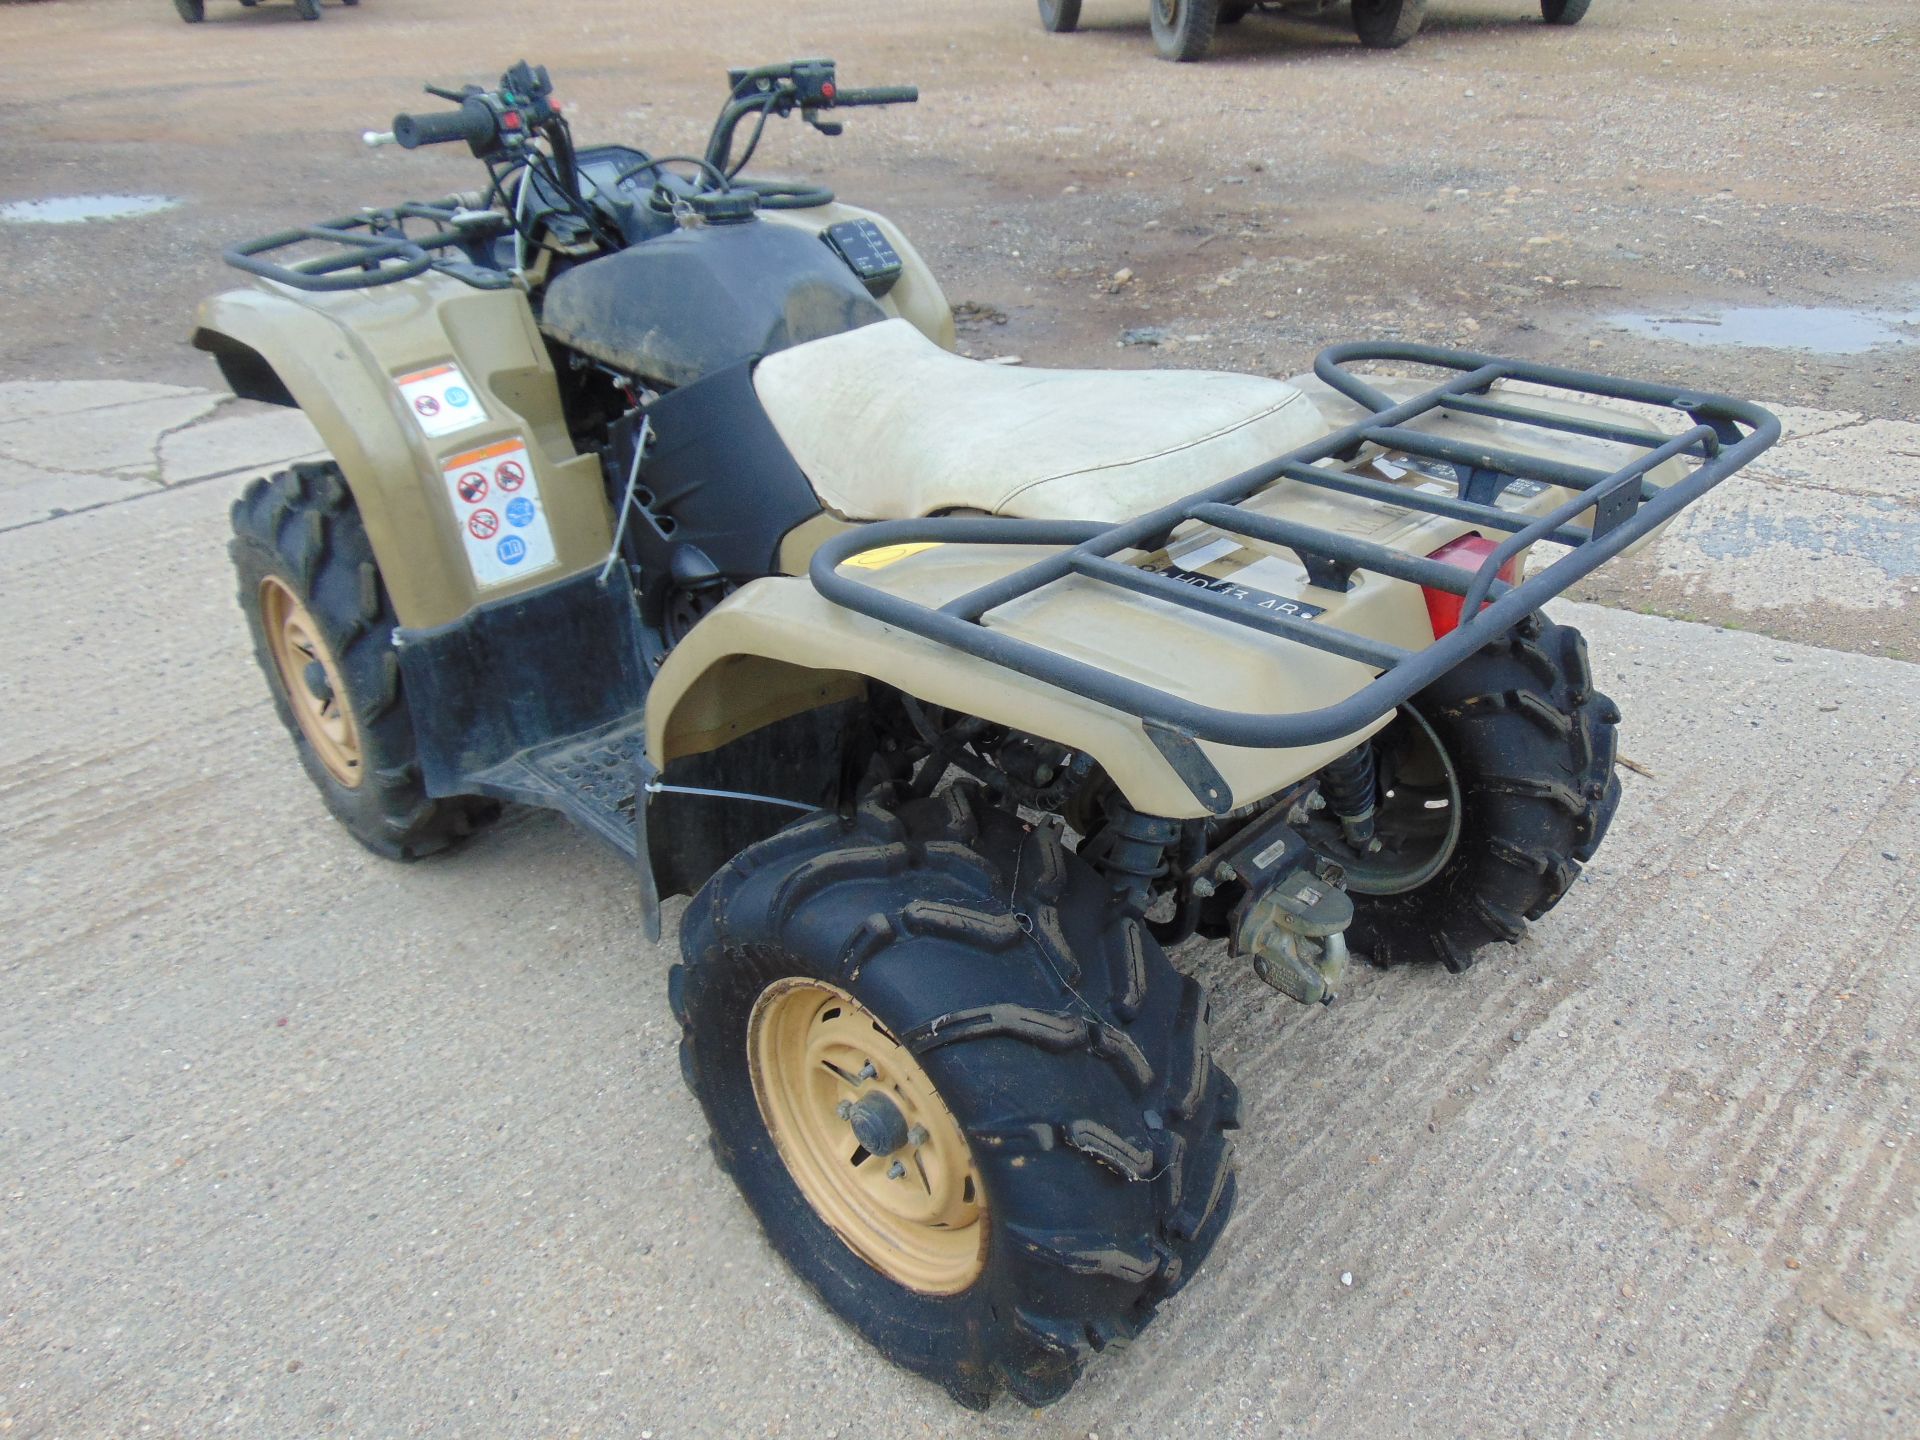 Military Specification Yamaha Grizzly 450 4 x 4 ATV Quad Bike - Image 5 of 16